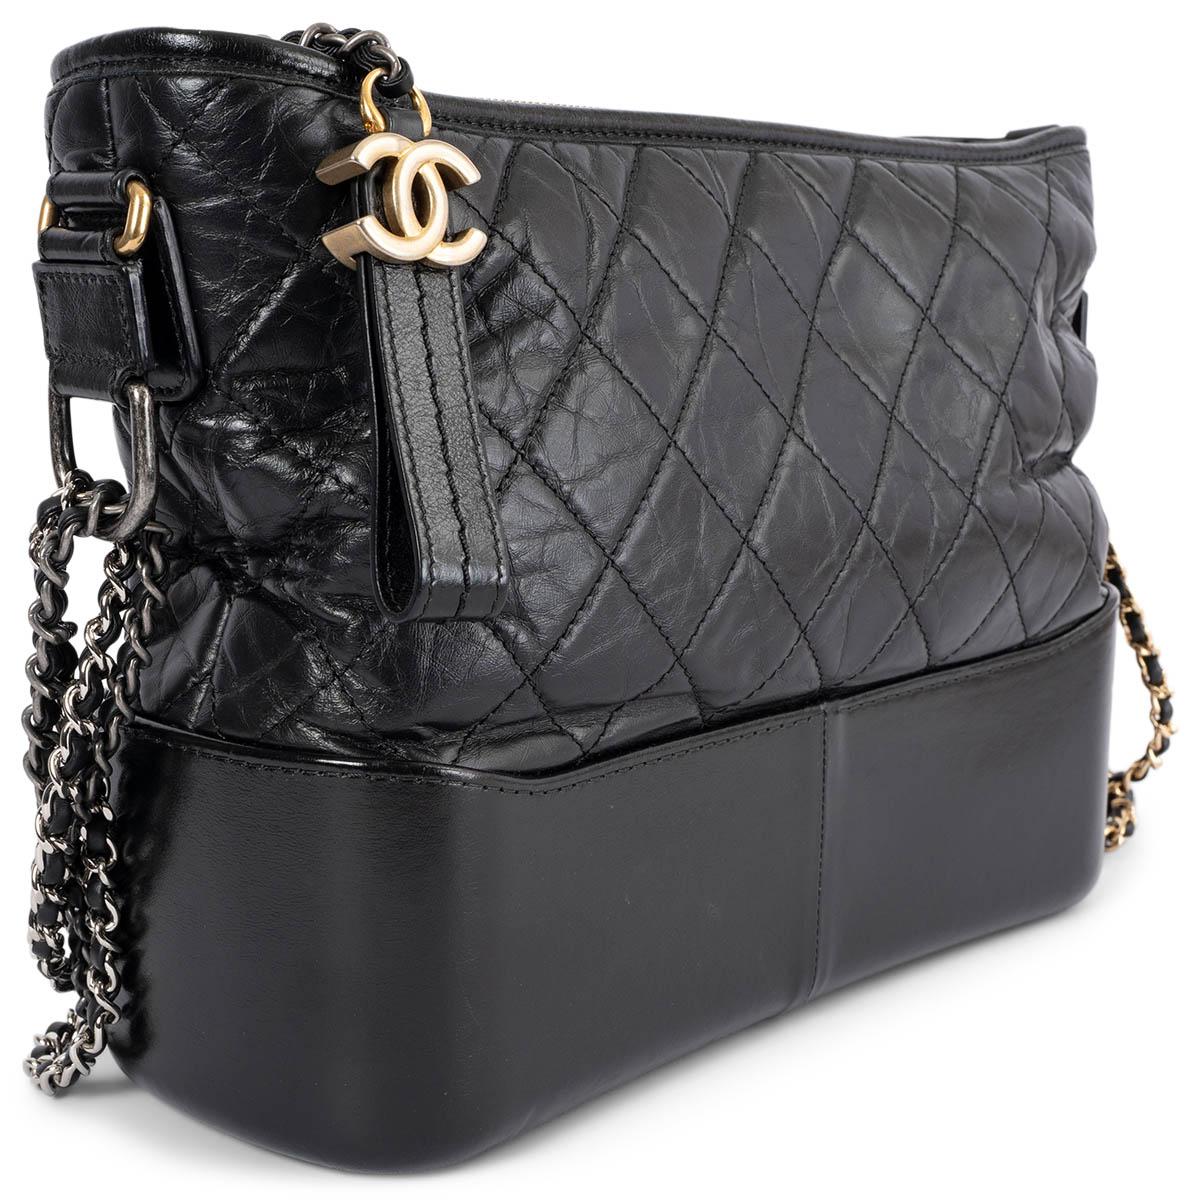 100% authentic Chanel Gabrielle Medium Hobo Bag in black aged calfskin featuring double chain shoulder-strap in gold-tone, silver-tone & ruthenium-finish metal. Opens with a CC zipper on top and is lined in red grosgrain fabric with one zipper